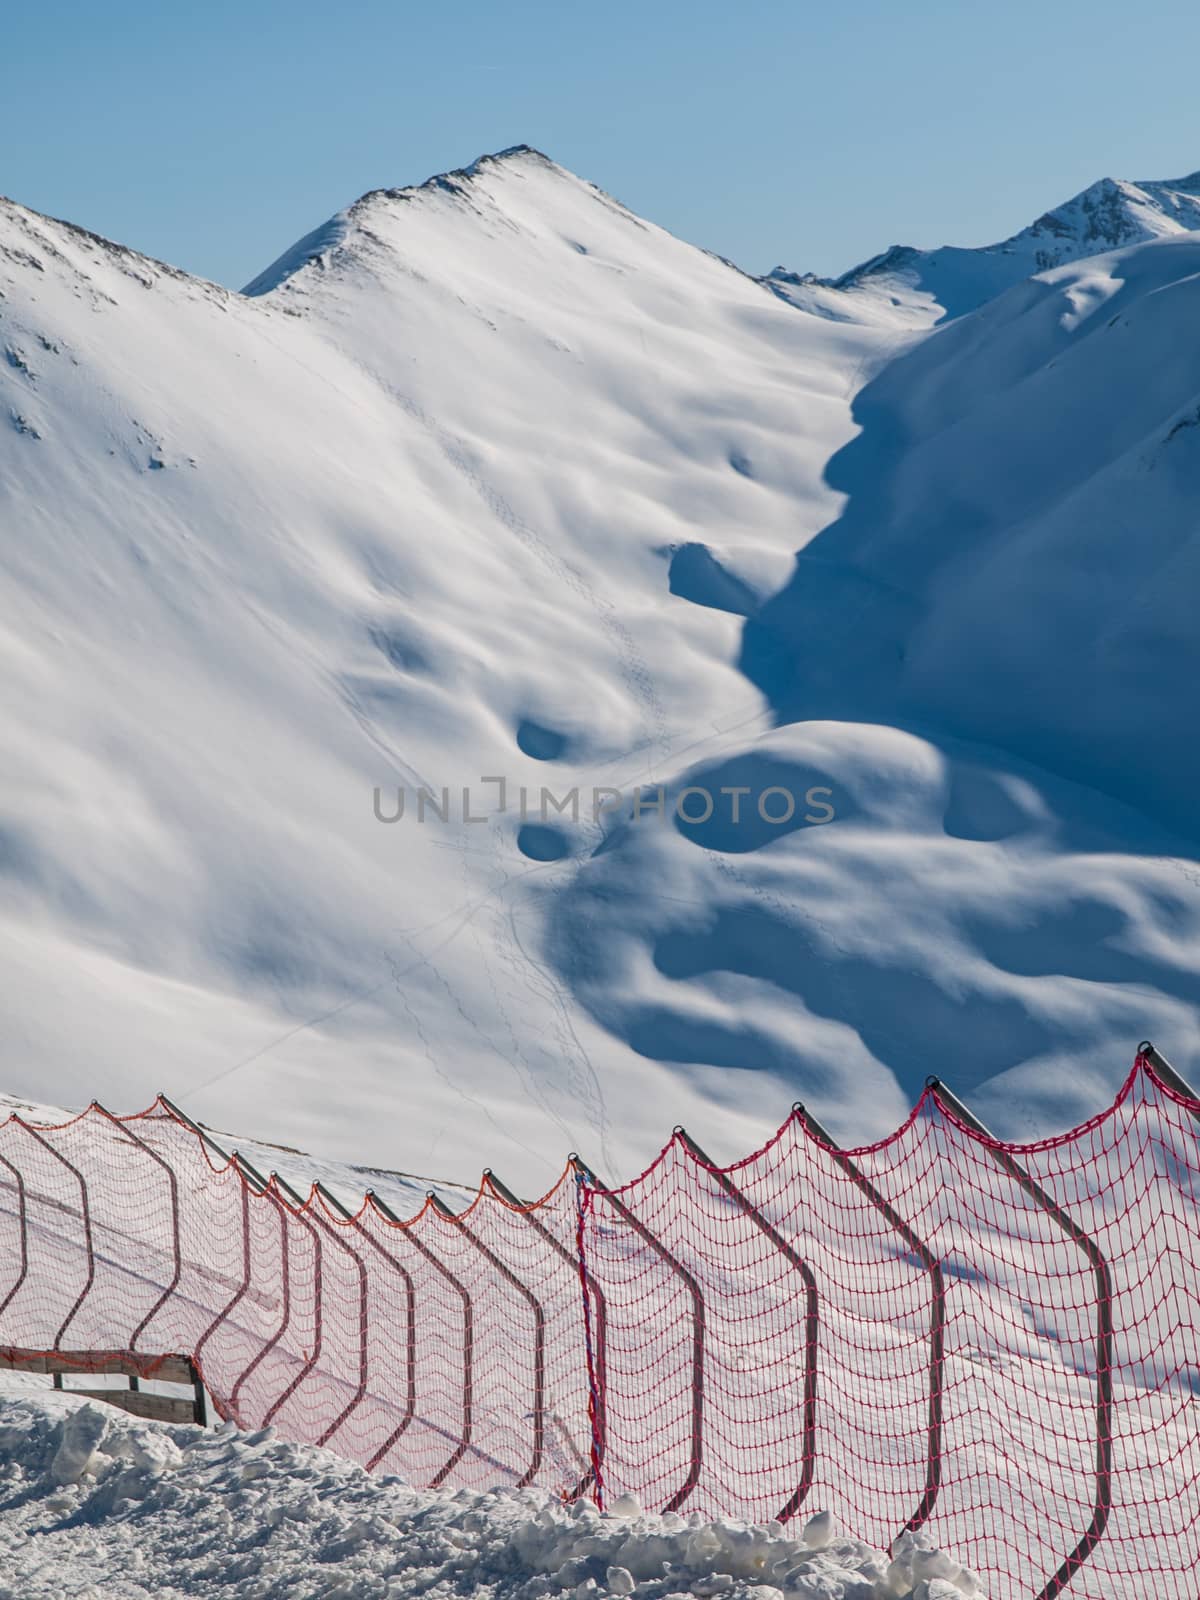 Skiing barriers by pyty